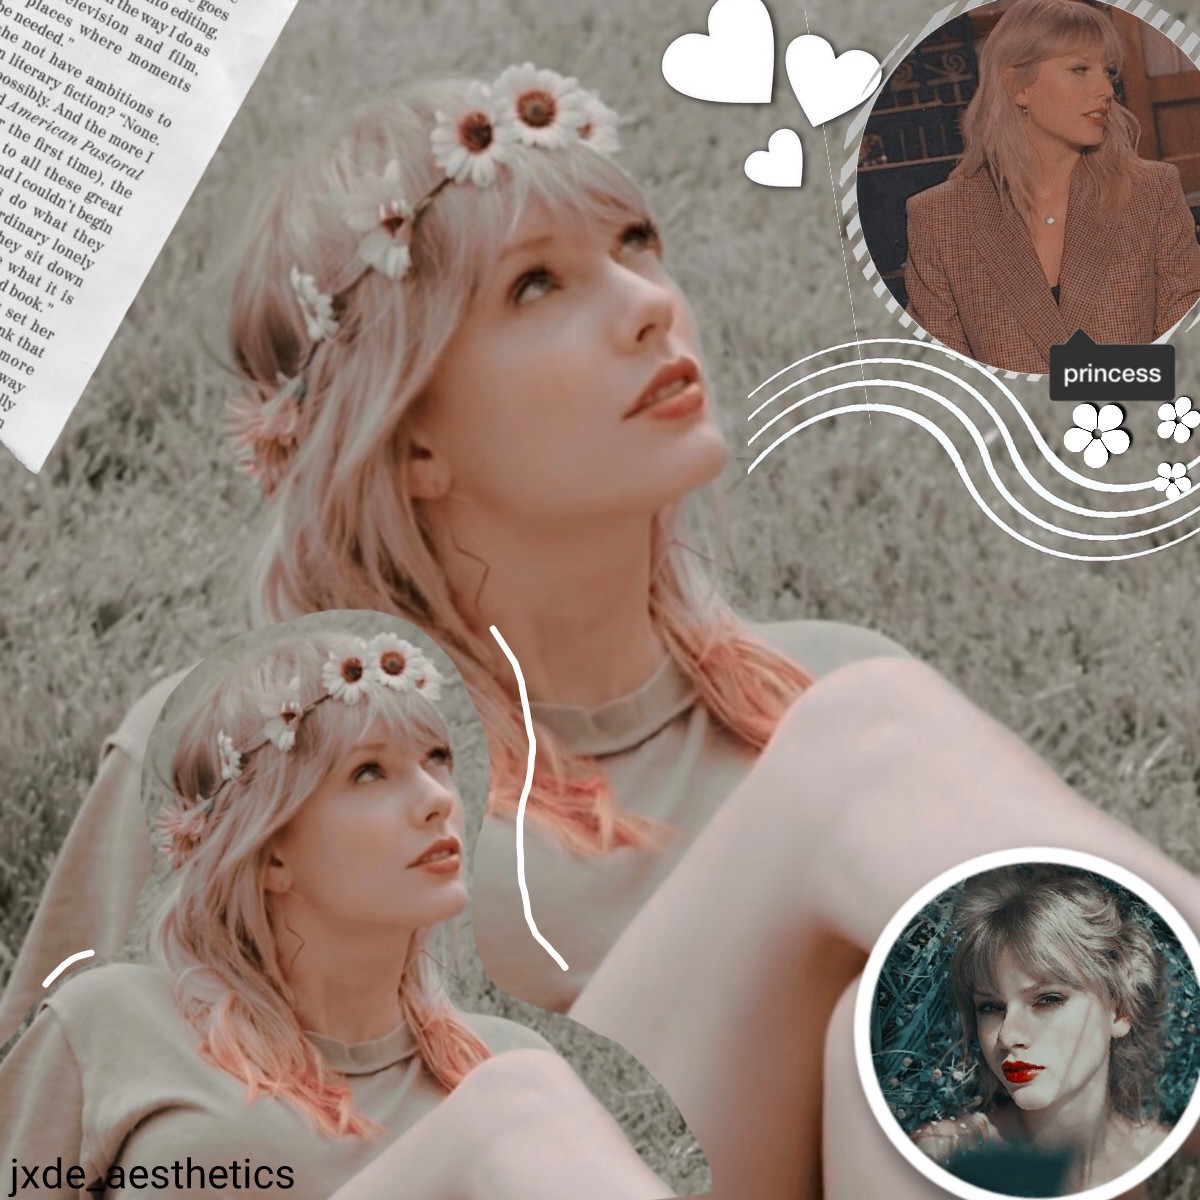 ☁tap☁ taylorrr we all love her <3 my friend helped w this so shout out to her 😊 